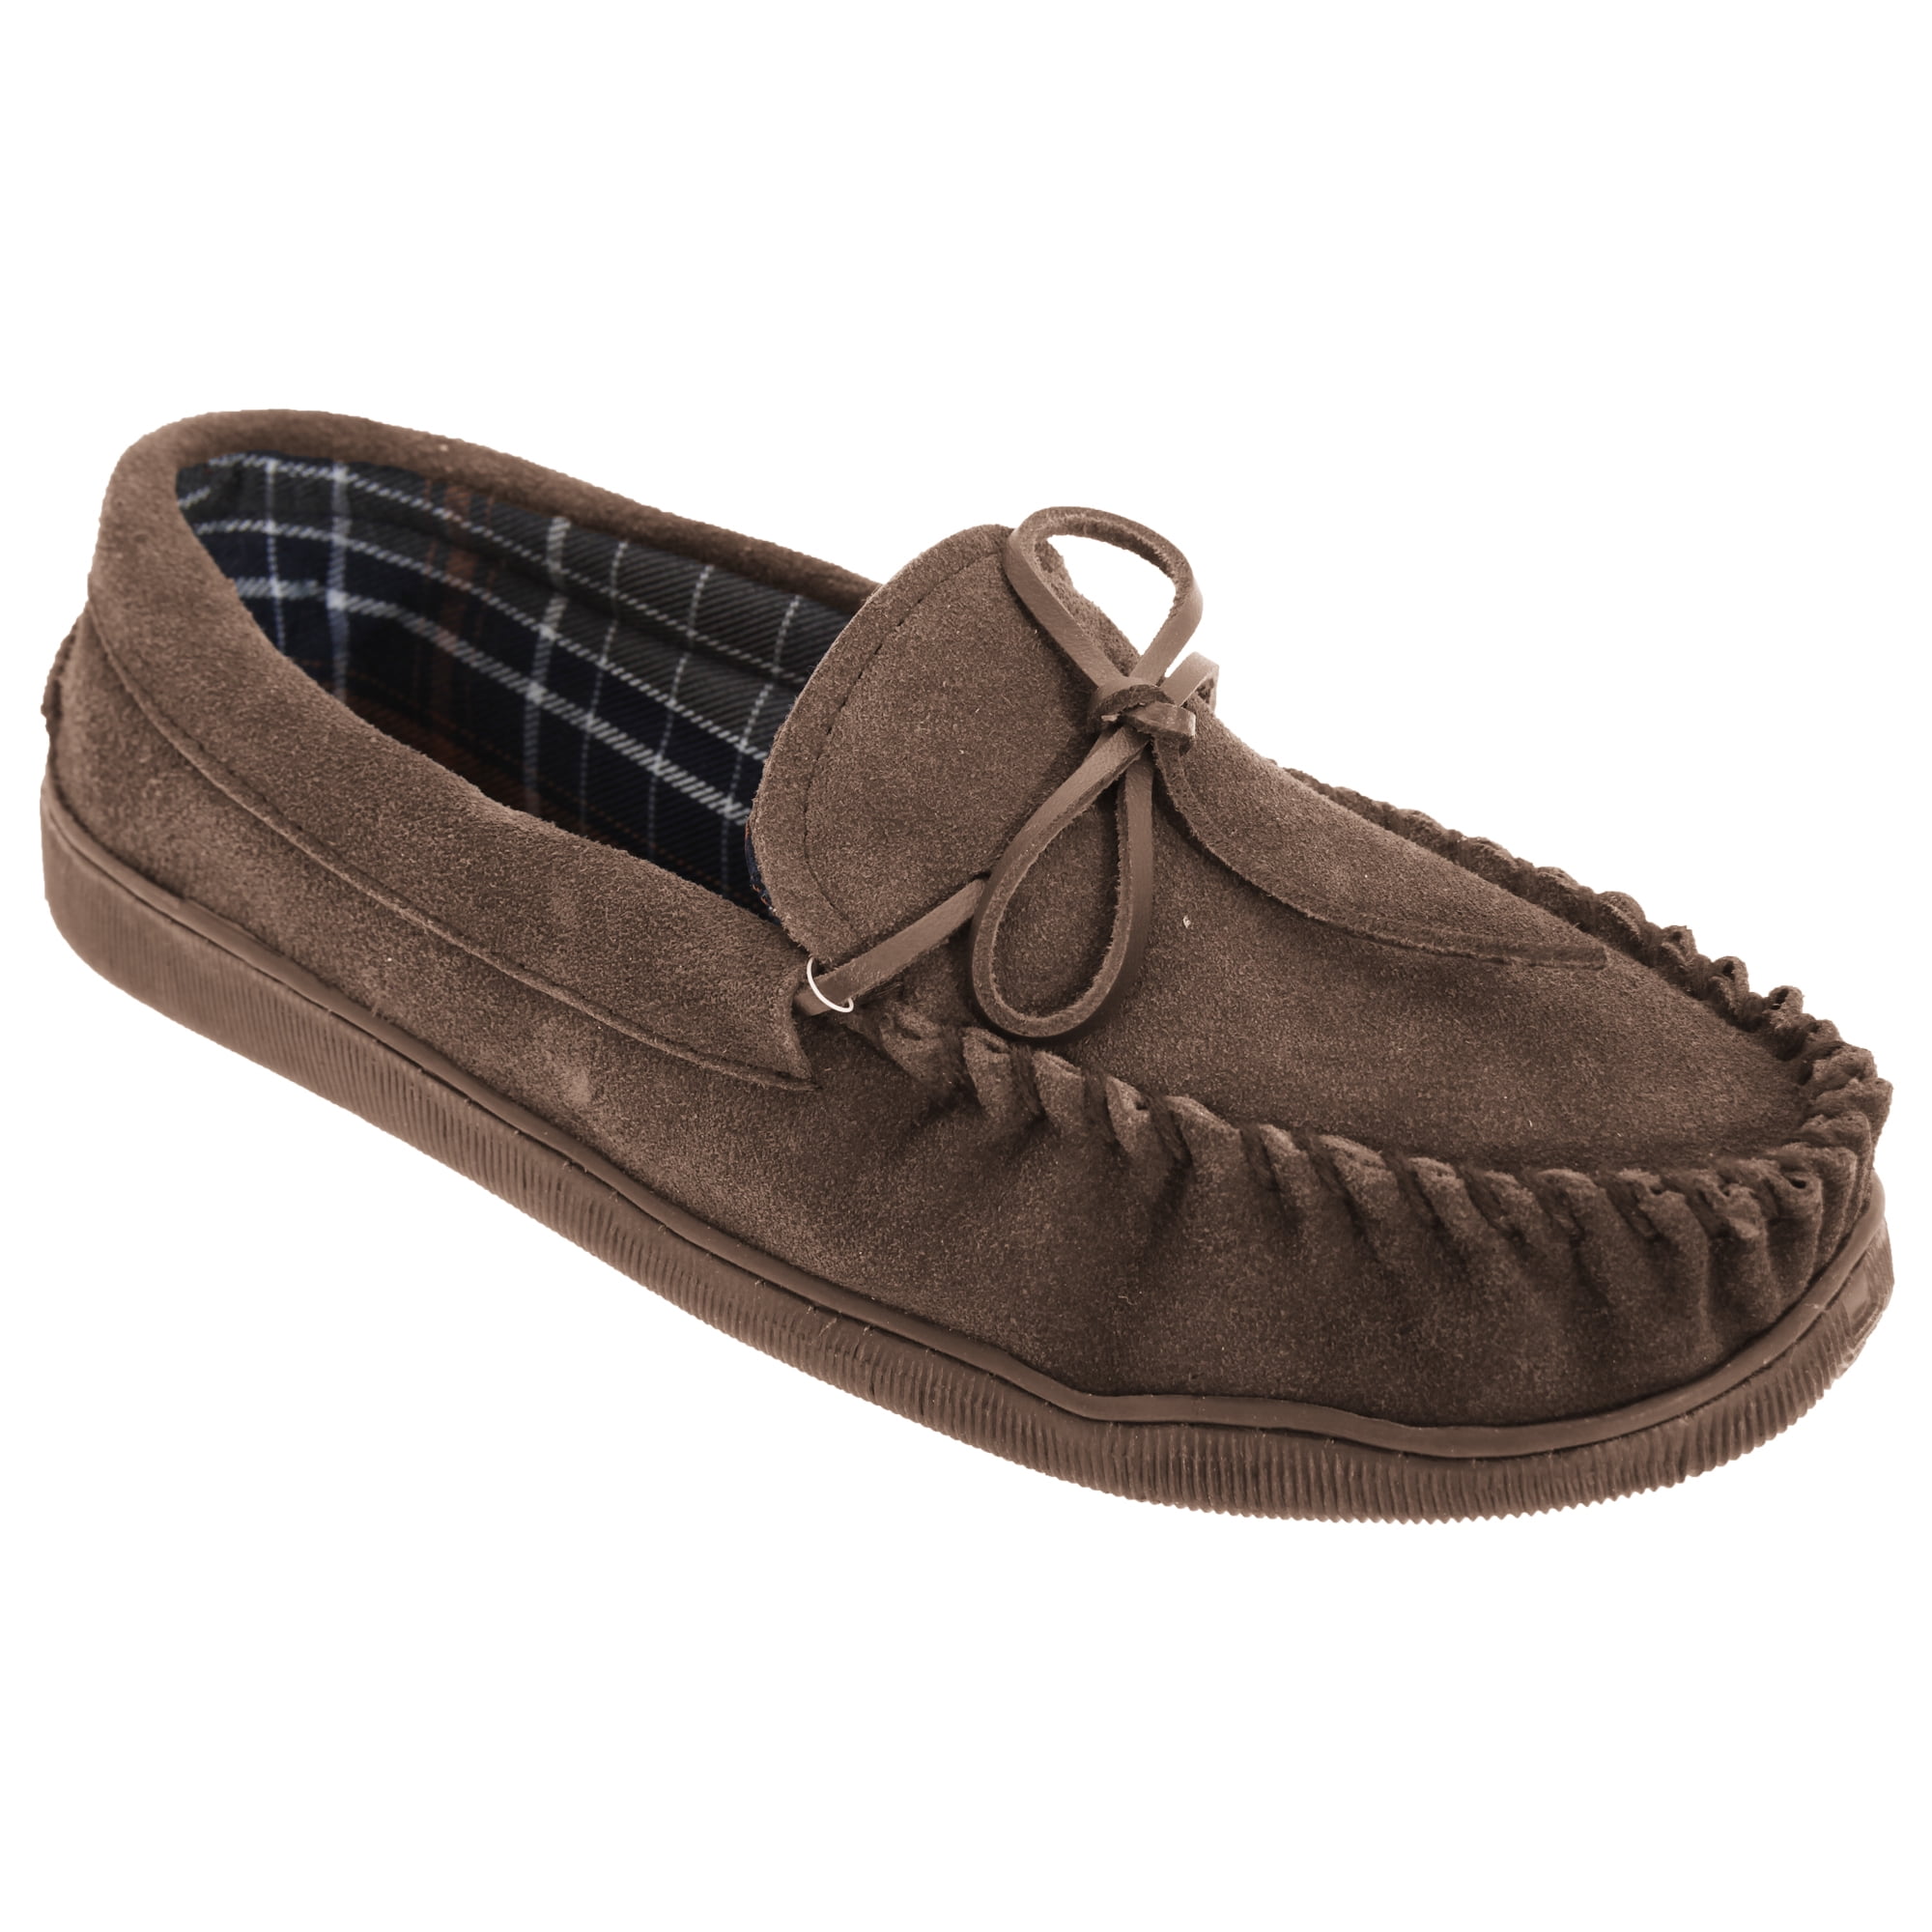 Mokkers JAKE Mens English Made Faux Fur Lined Moccasin Stitch Slippers No Sole 